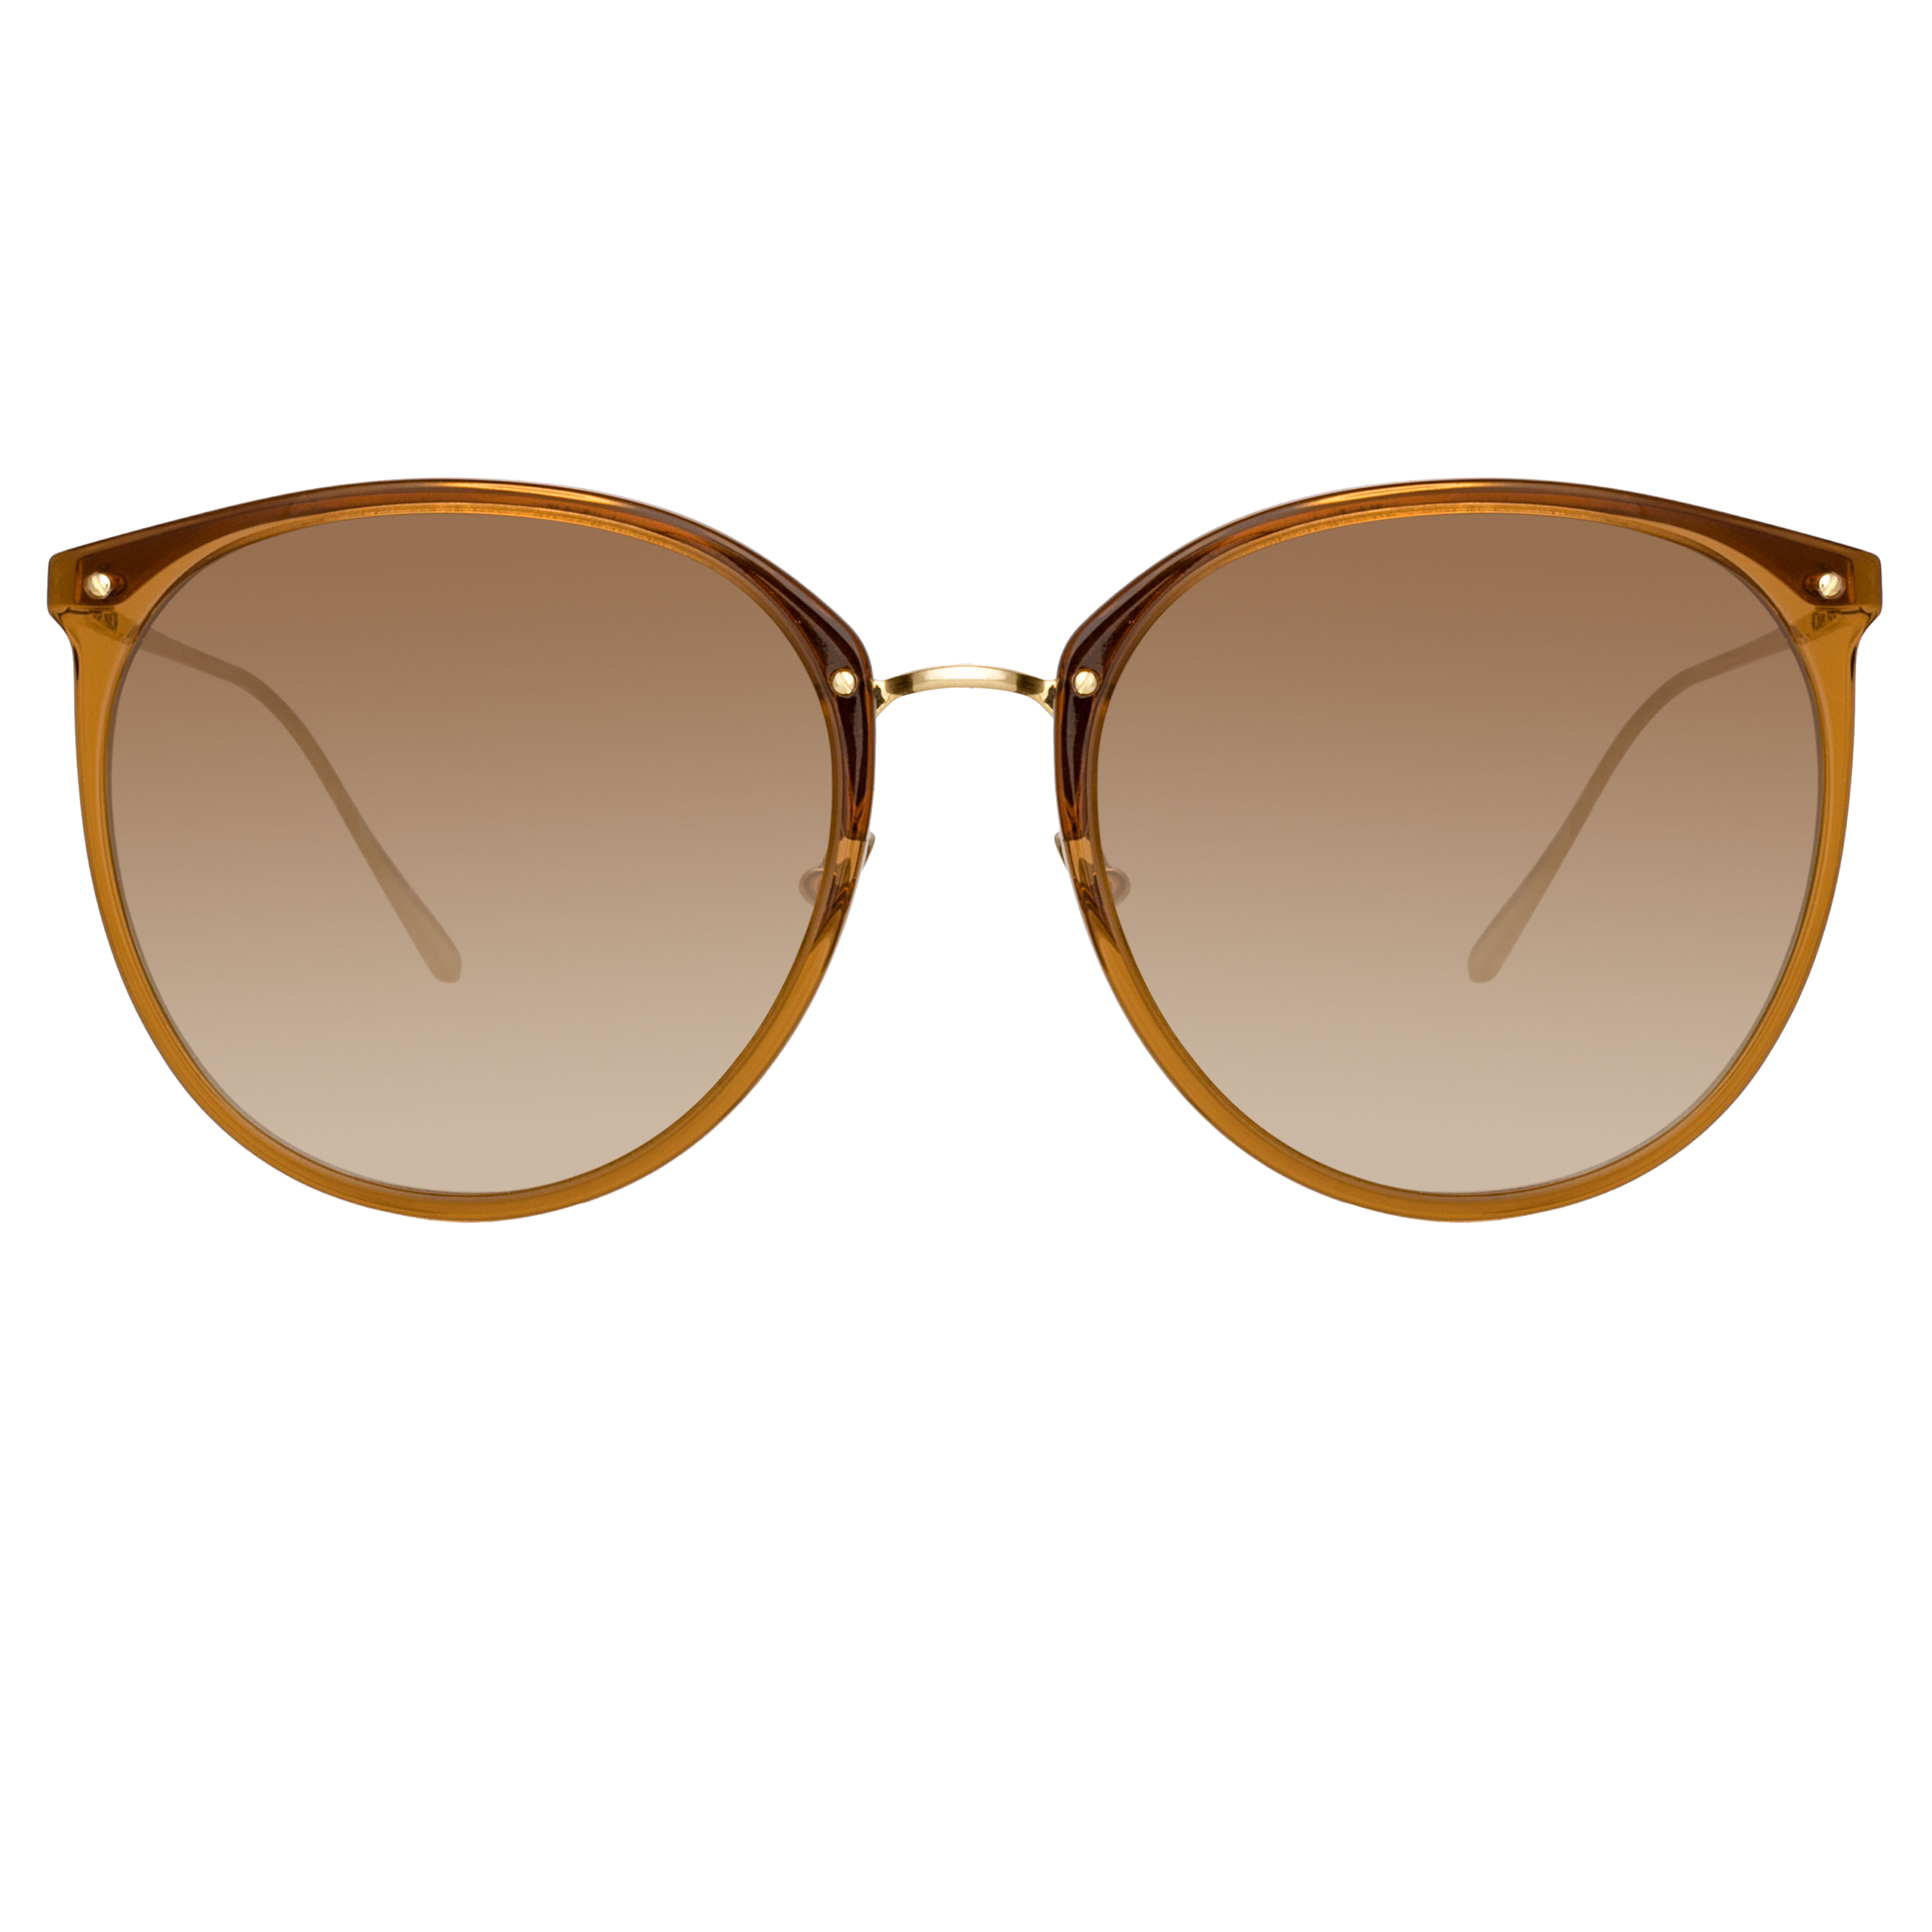 The Kings Oversized Sunglasses in Tobacco (C20)